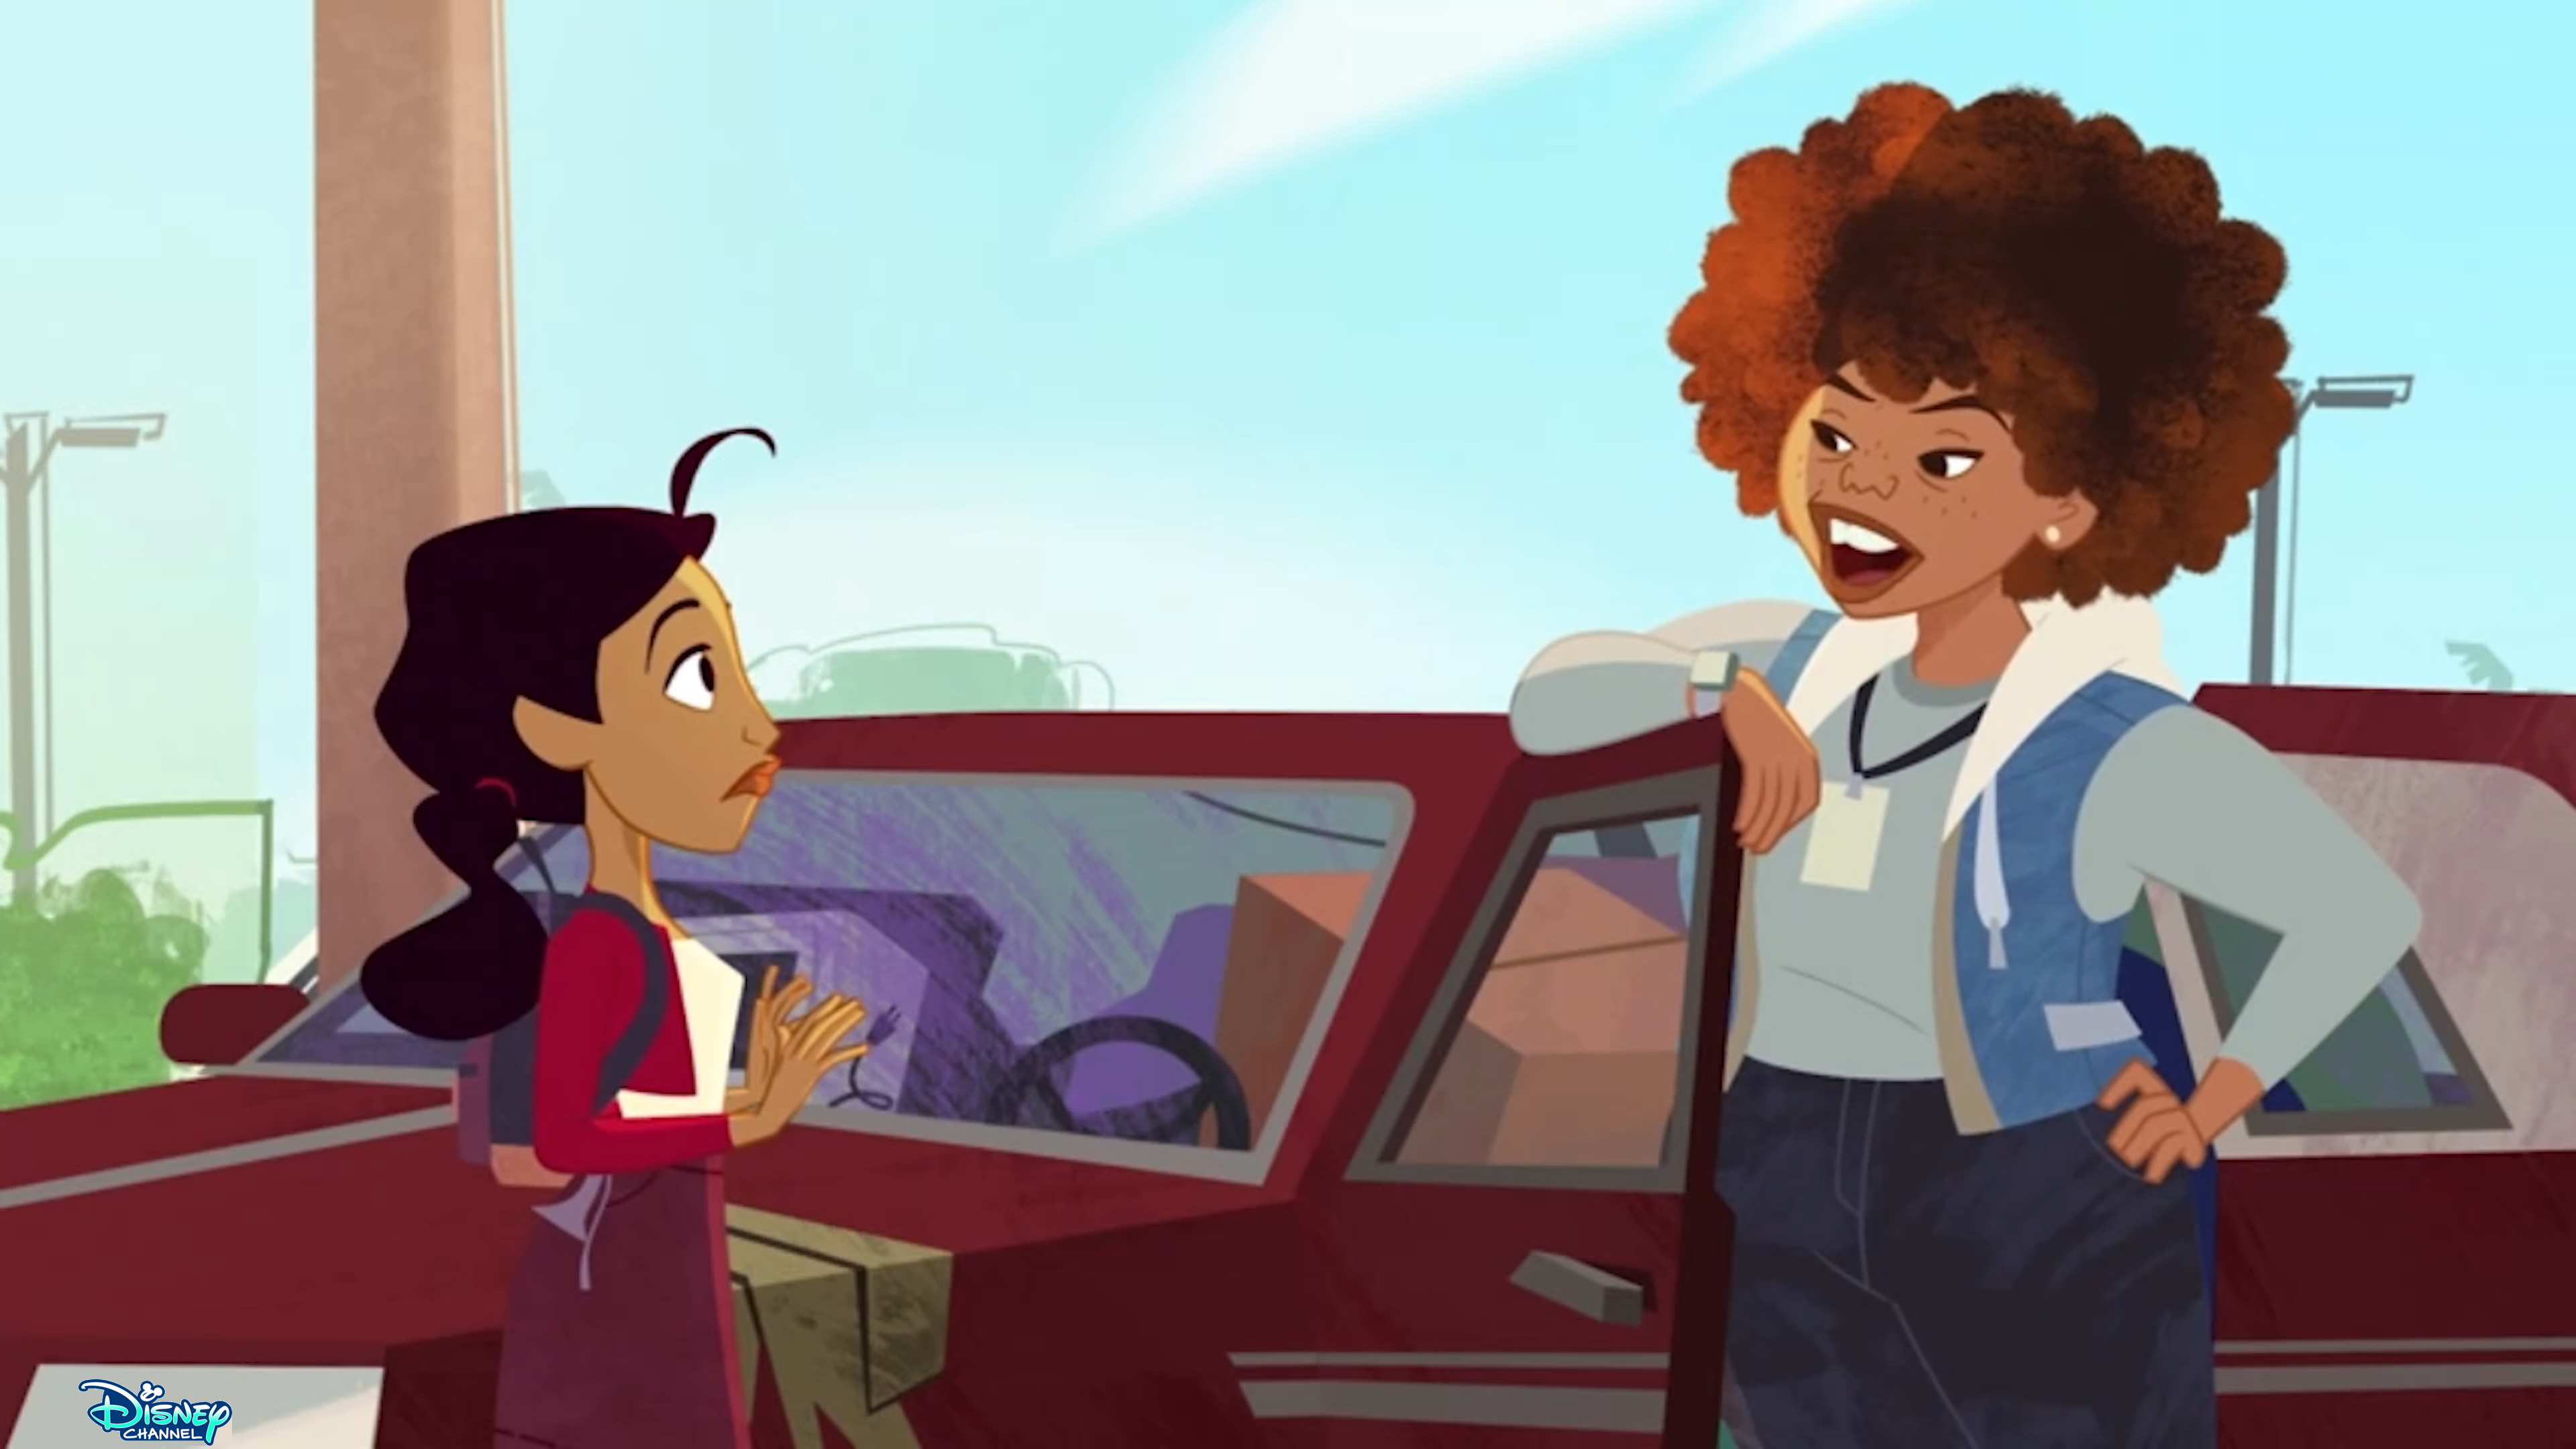  The Proud Family: Louder and Prouder - home pagina School Promo Disney Channel 1